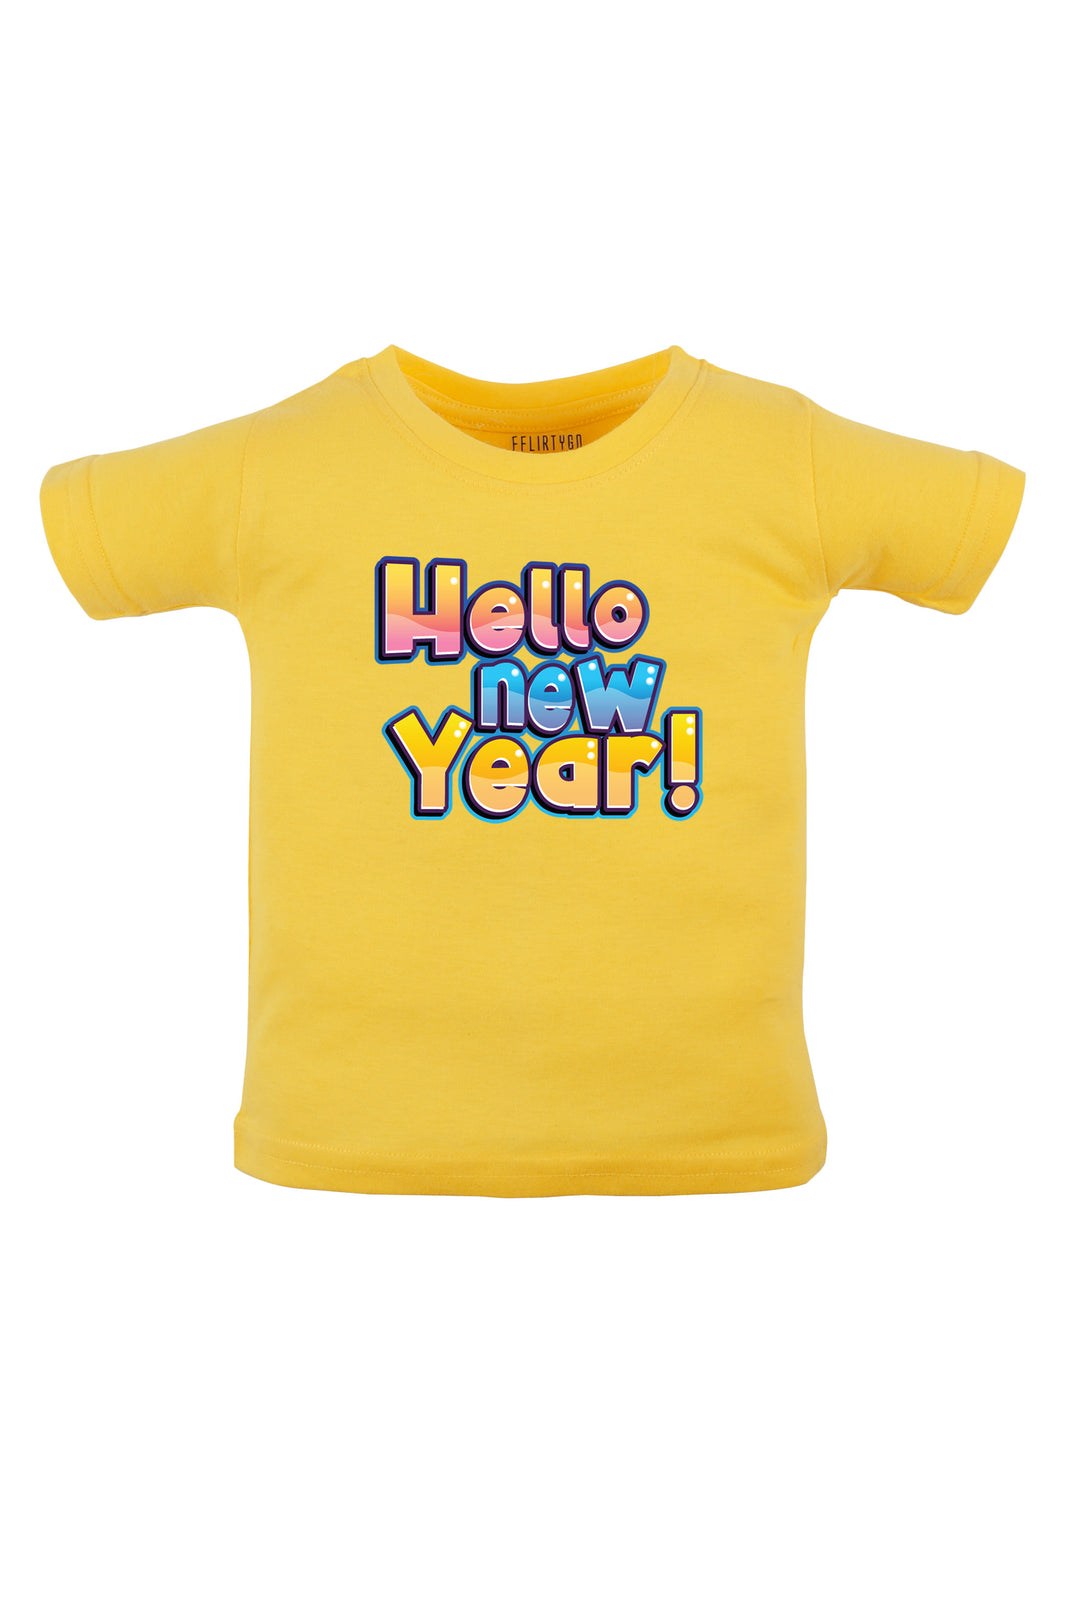 Happy New Year Multicolor Kids T Shirt